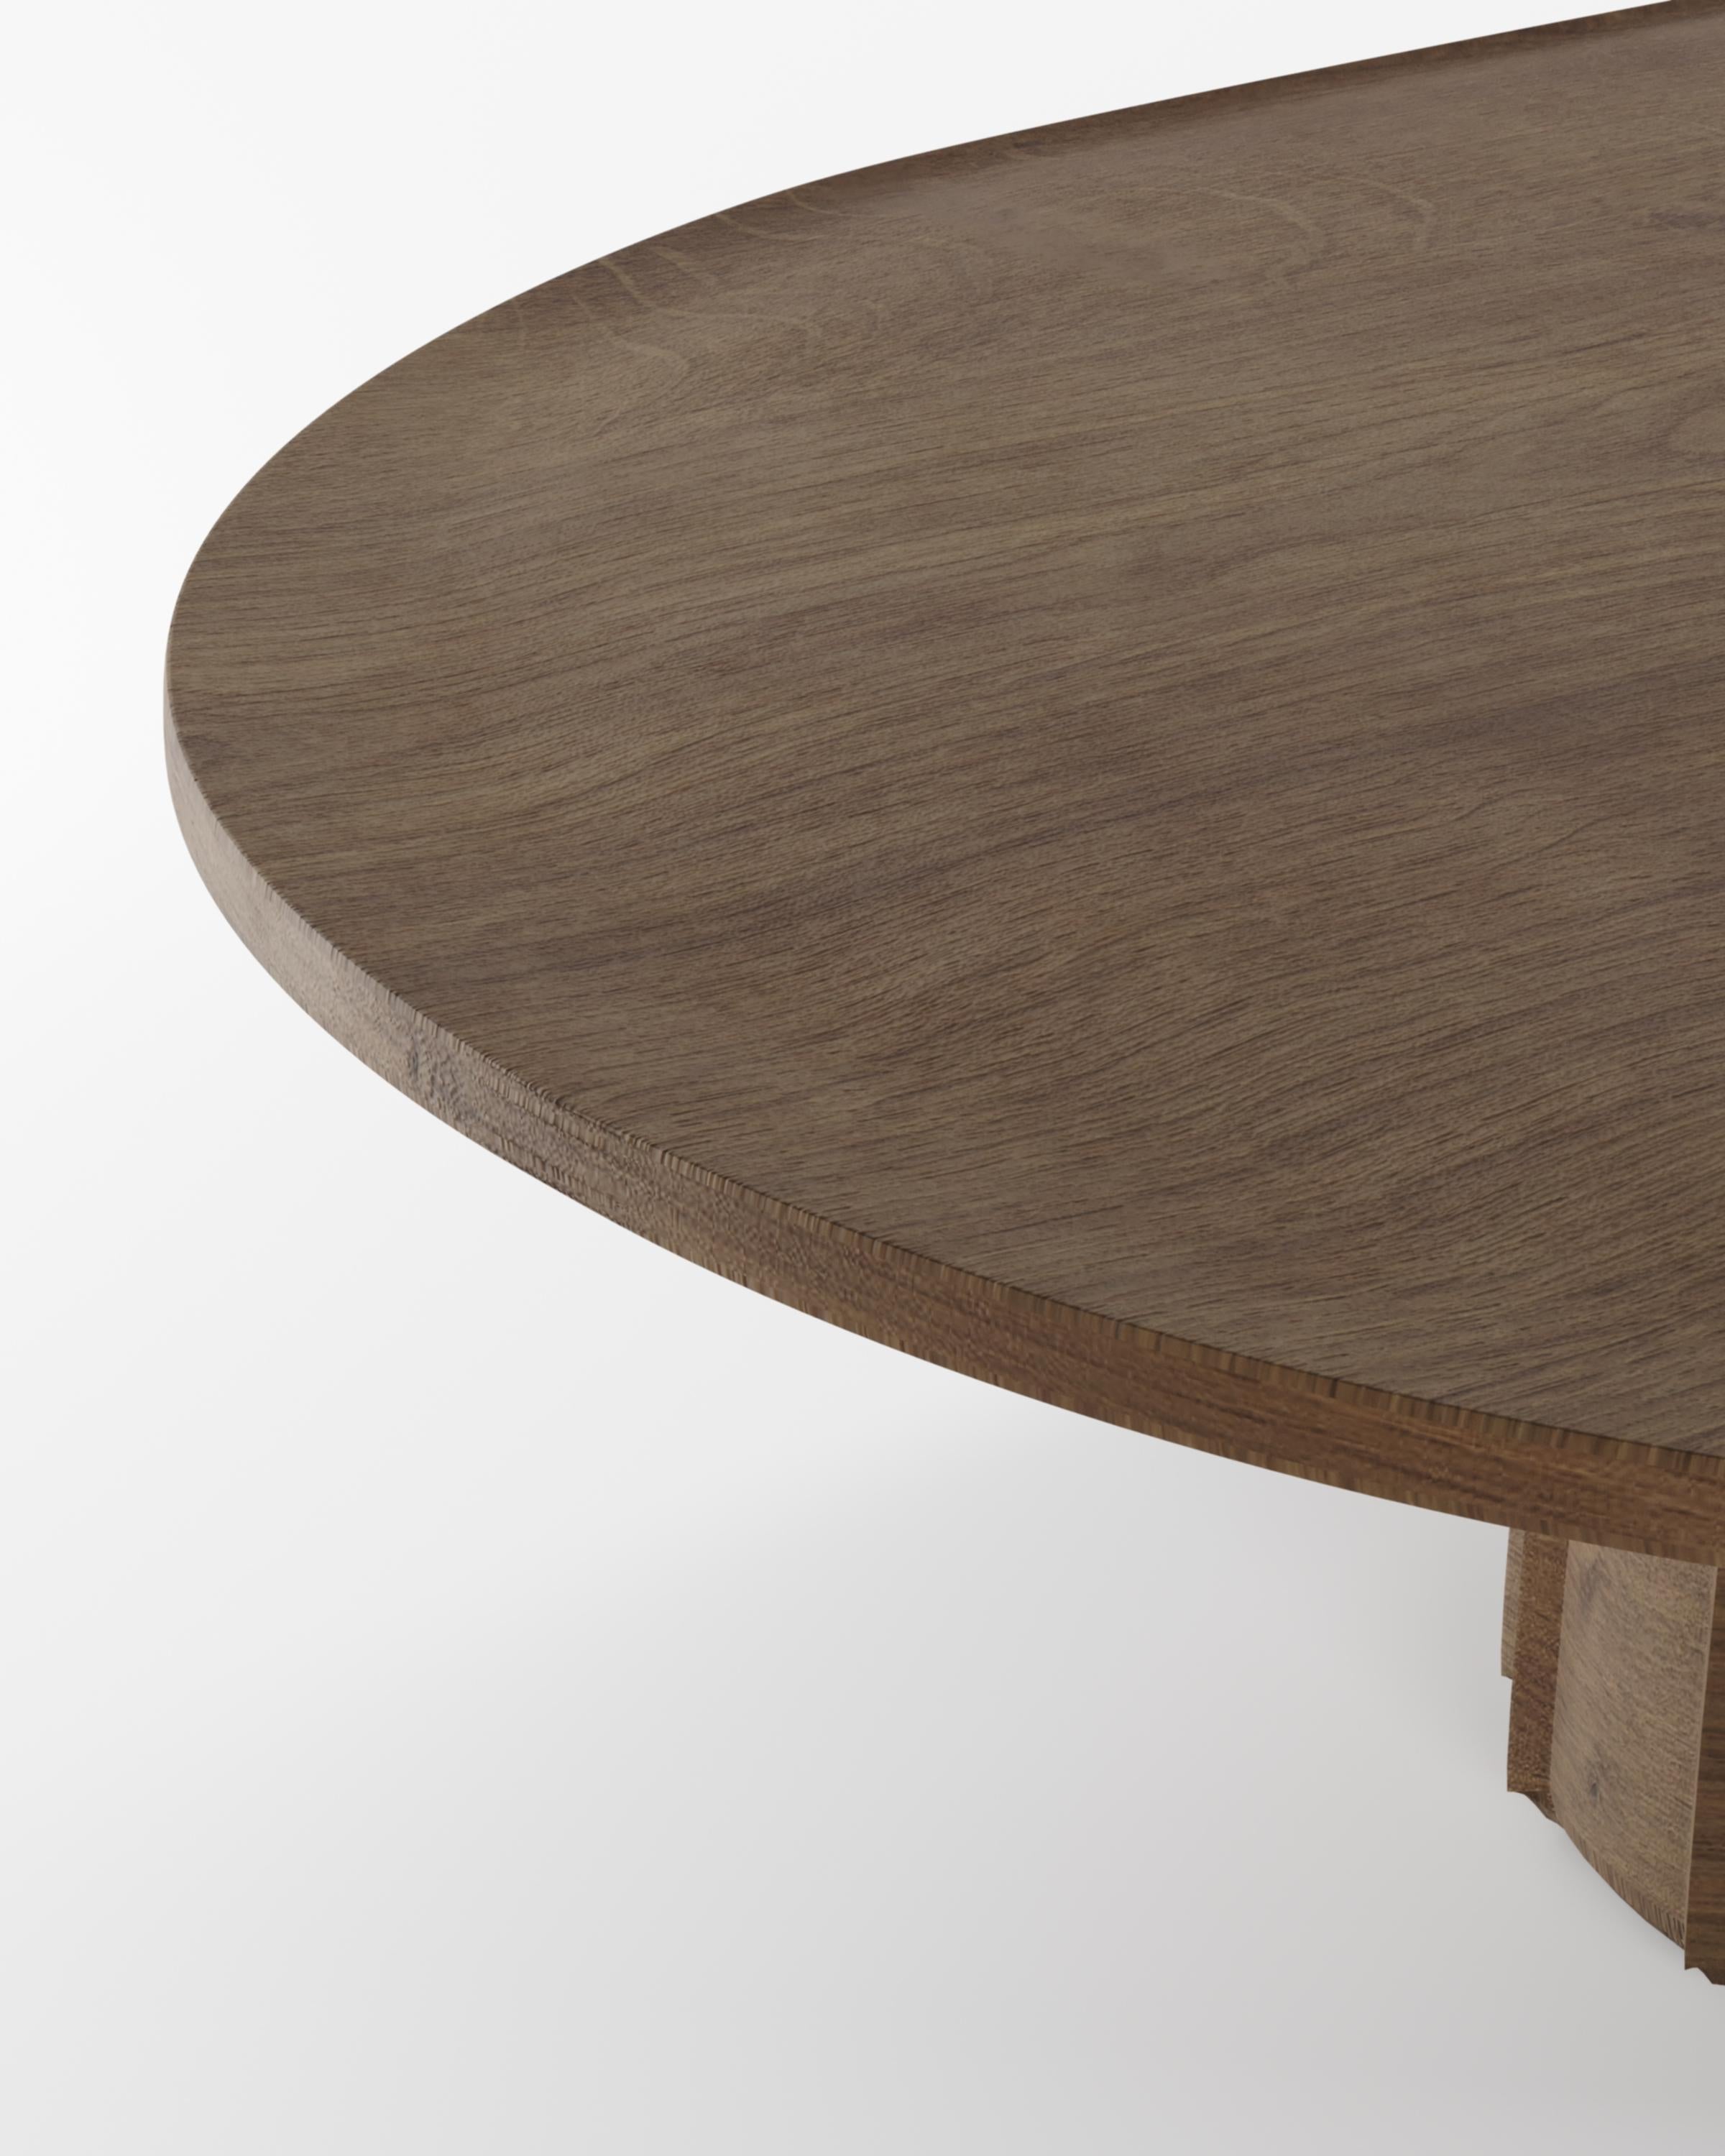 Collector- 21st Century Designed by Alter Ego Djembe Center Table Dark Oak 



DIMENSIONS:
W 180 cm  70,8”
D 70 cm  27,5”
H 31 cm  12,2”


PRODUCT FEATURES
Oak

PRODUCT OPTIONS
Available in all COLLECTOR wood swatches
Available to be lacquered in